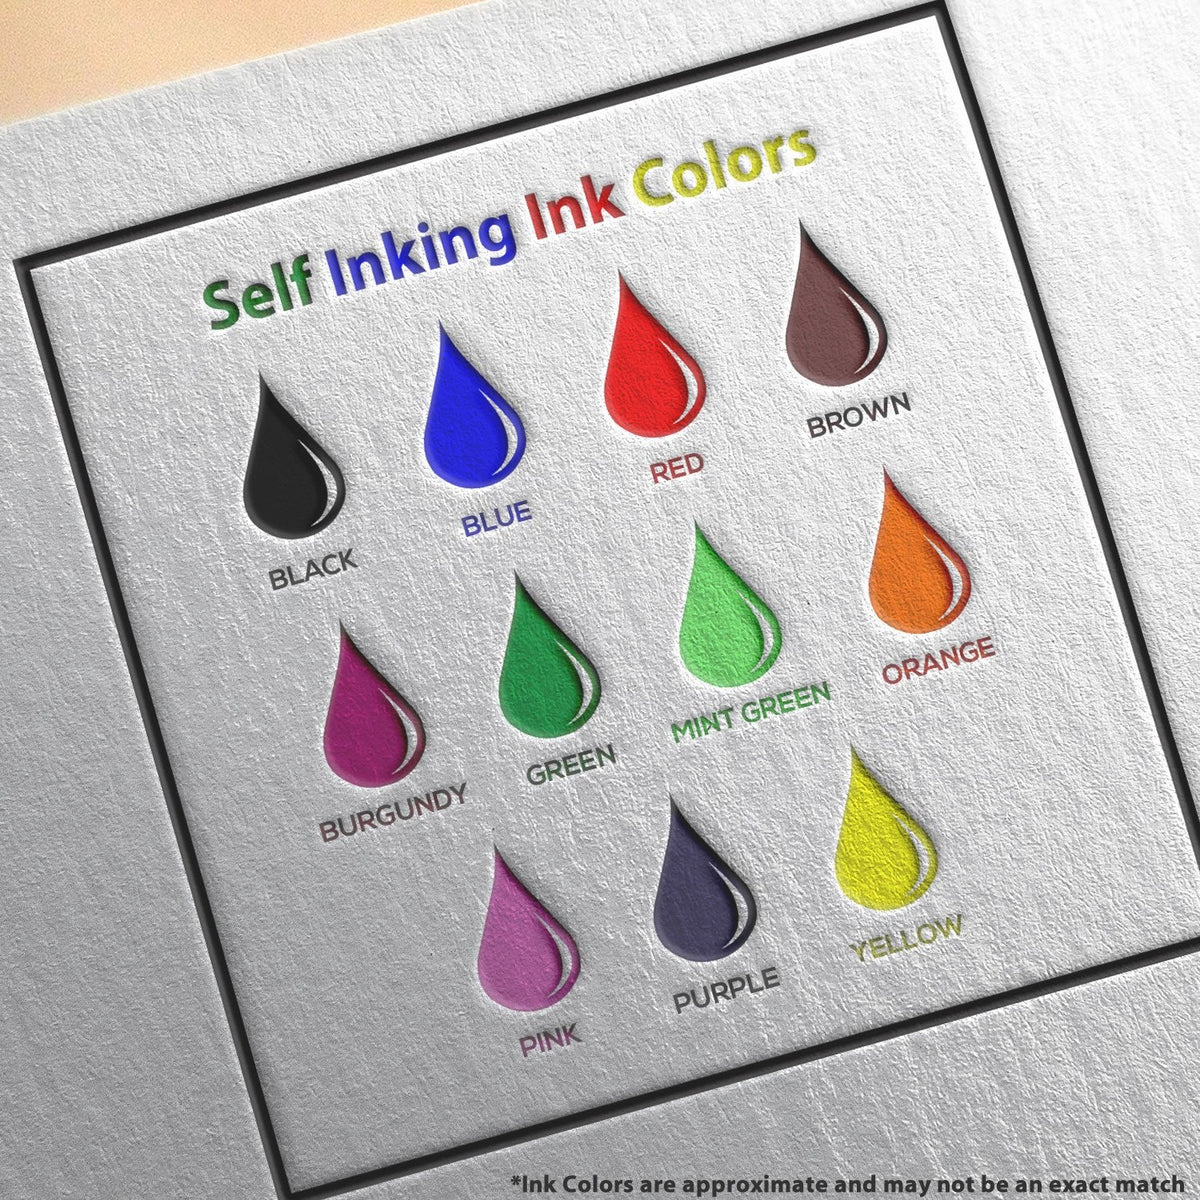 Self-Inking Nice Work Stamp Ink Color Options